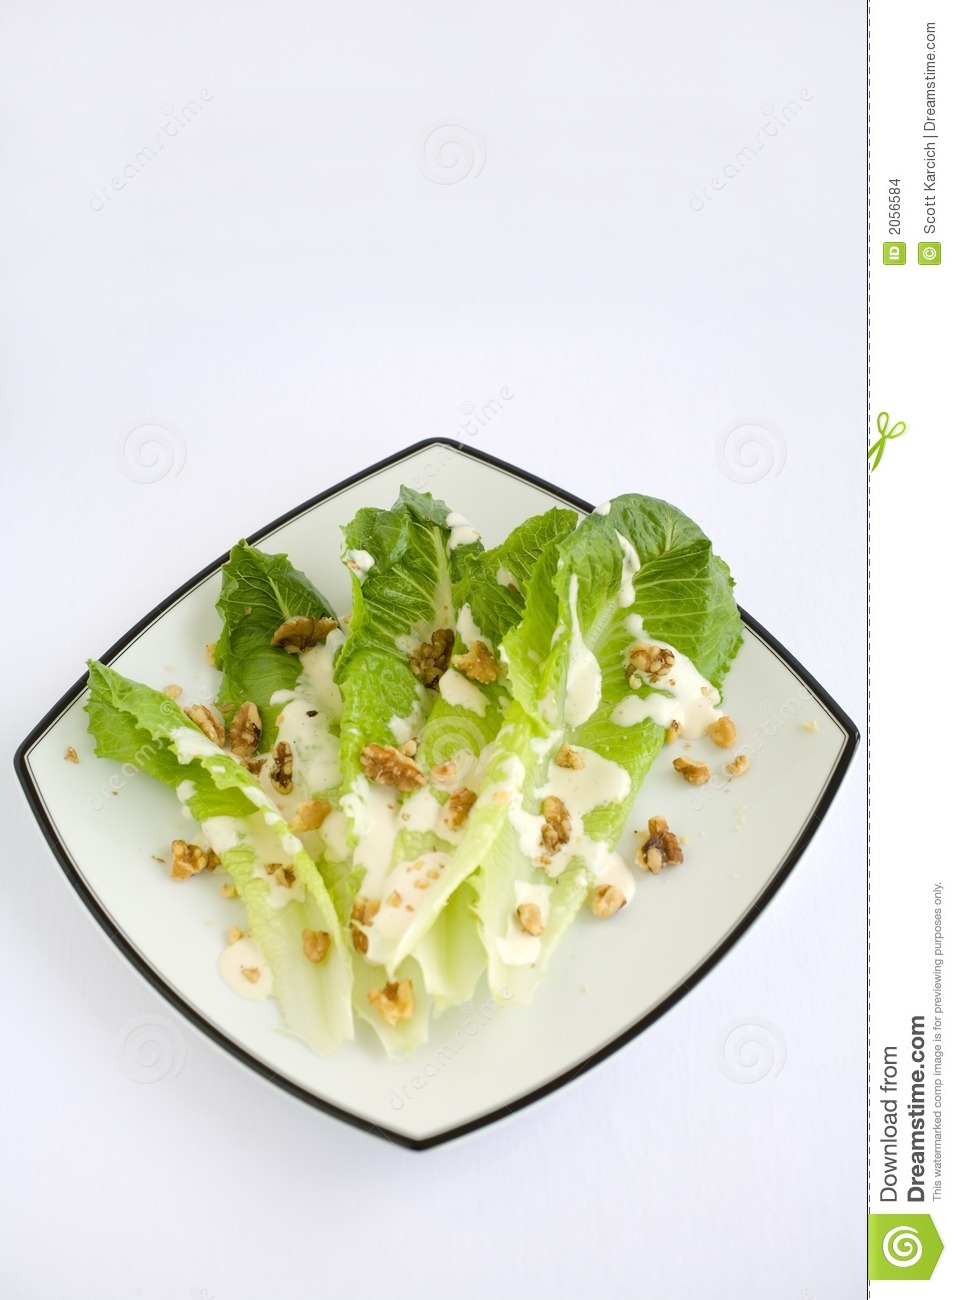 Salad Romaine Lettuce With Ranch Dressing Stock Images   Image